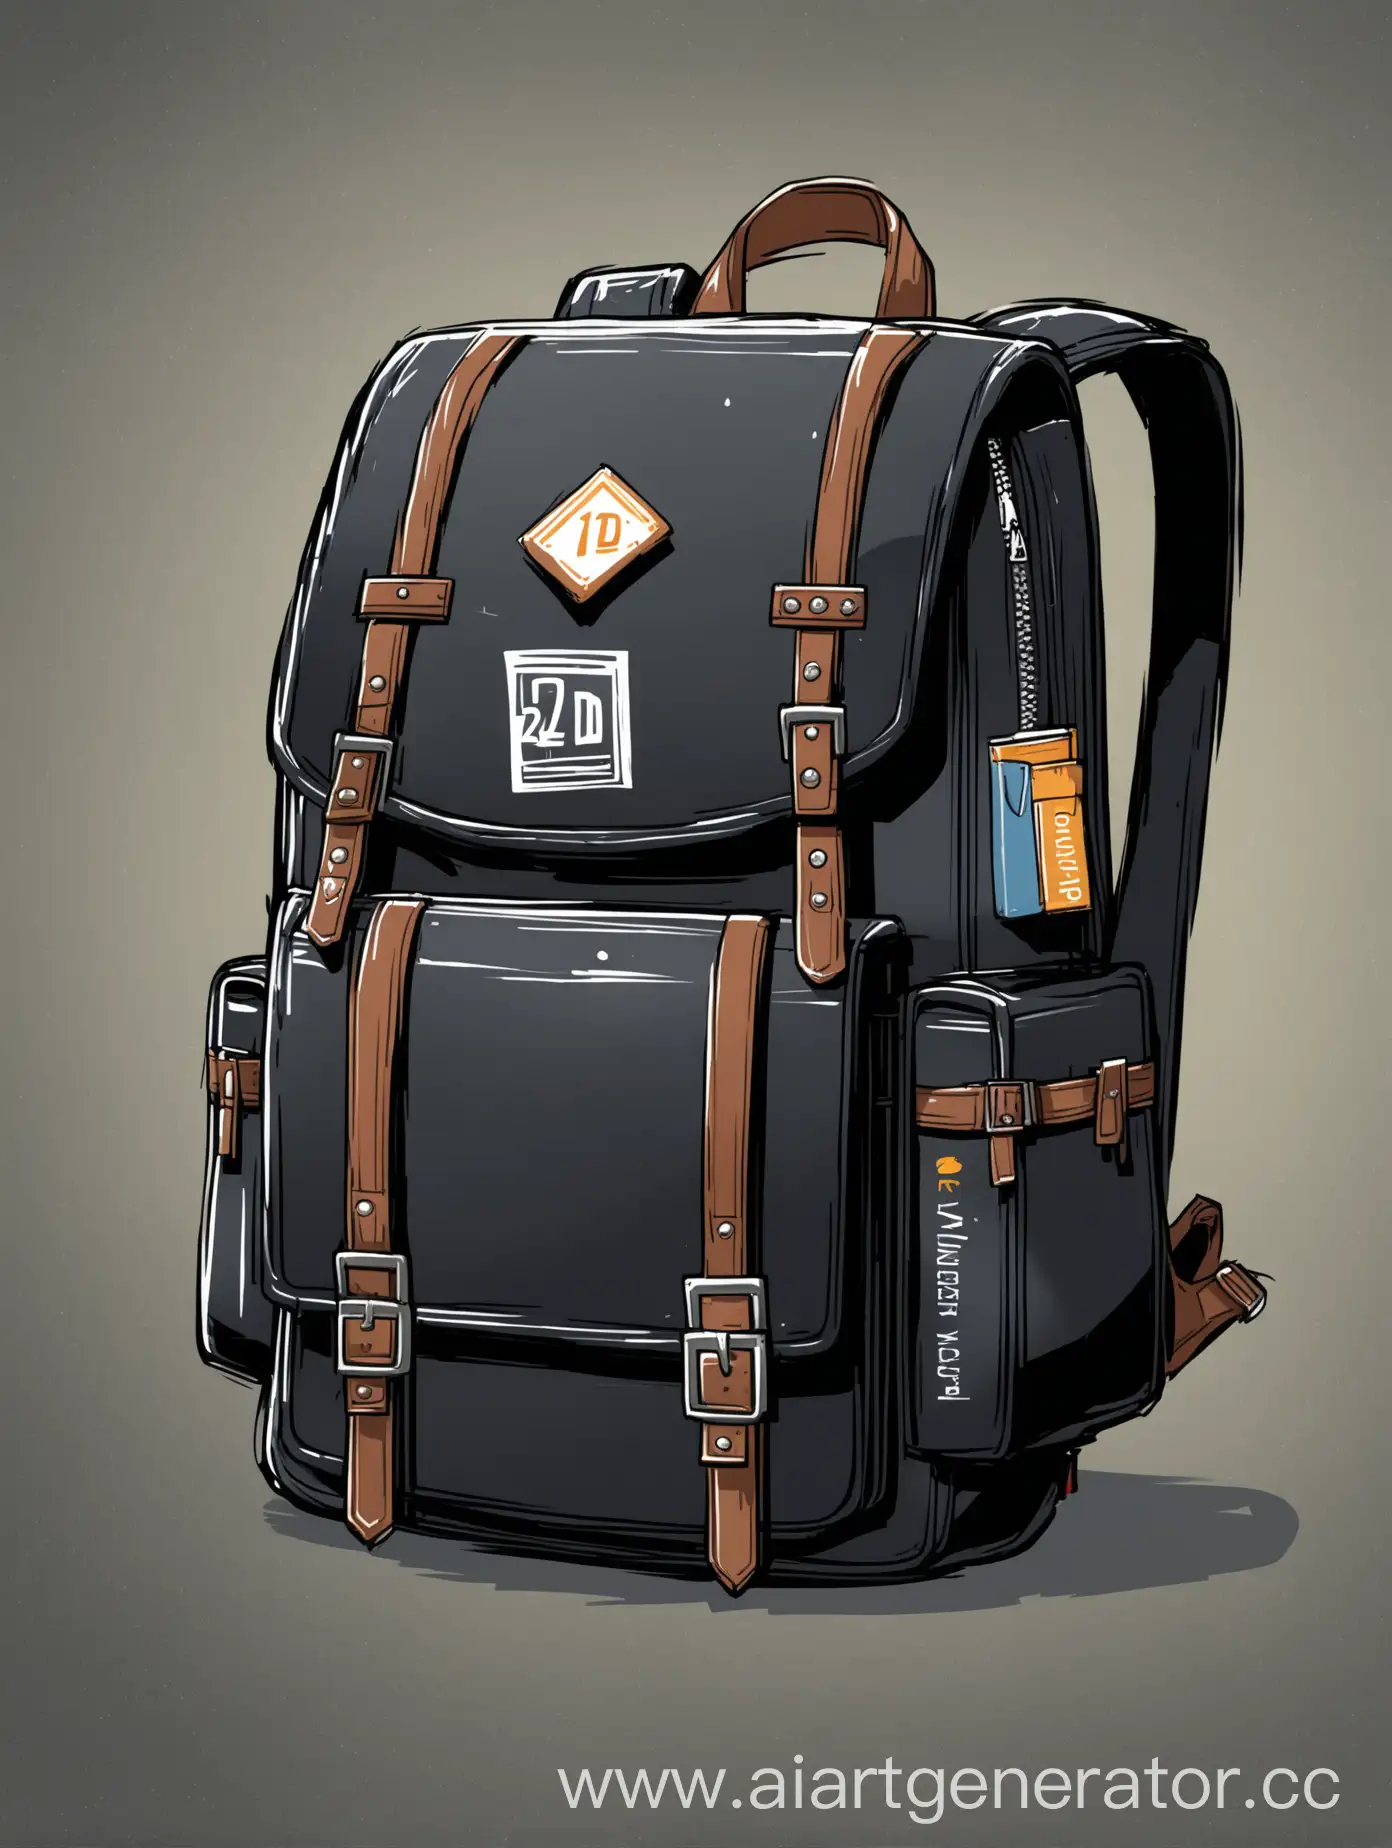 Black-School-Backpack-Concept-Art-Minimalist-Design-with-Sleek-Lines-and-Practical-Features